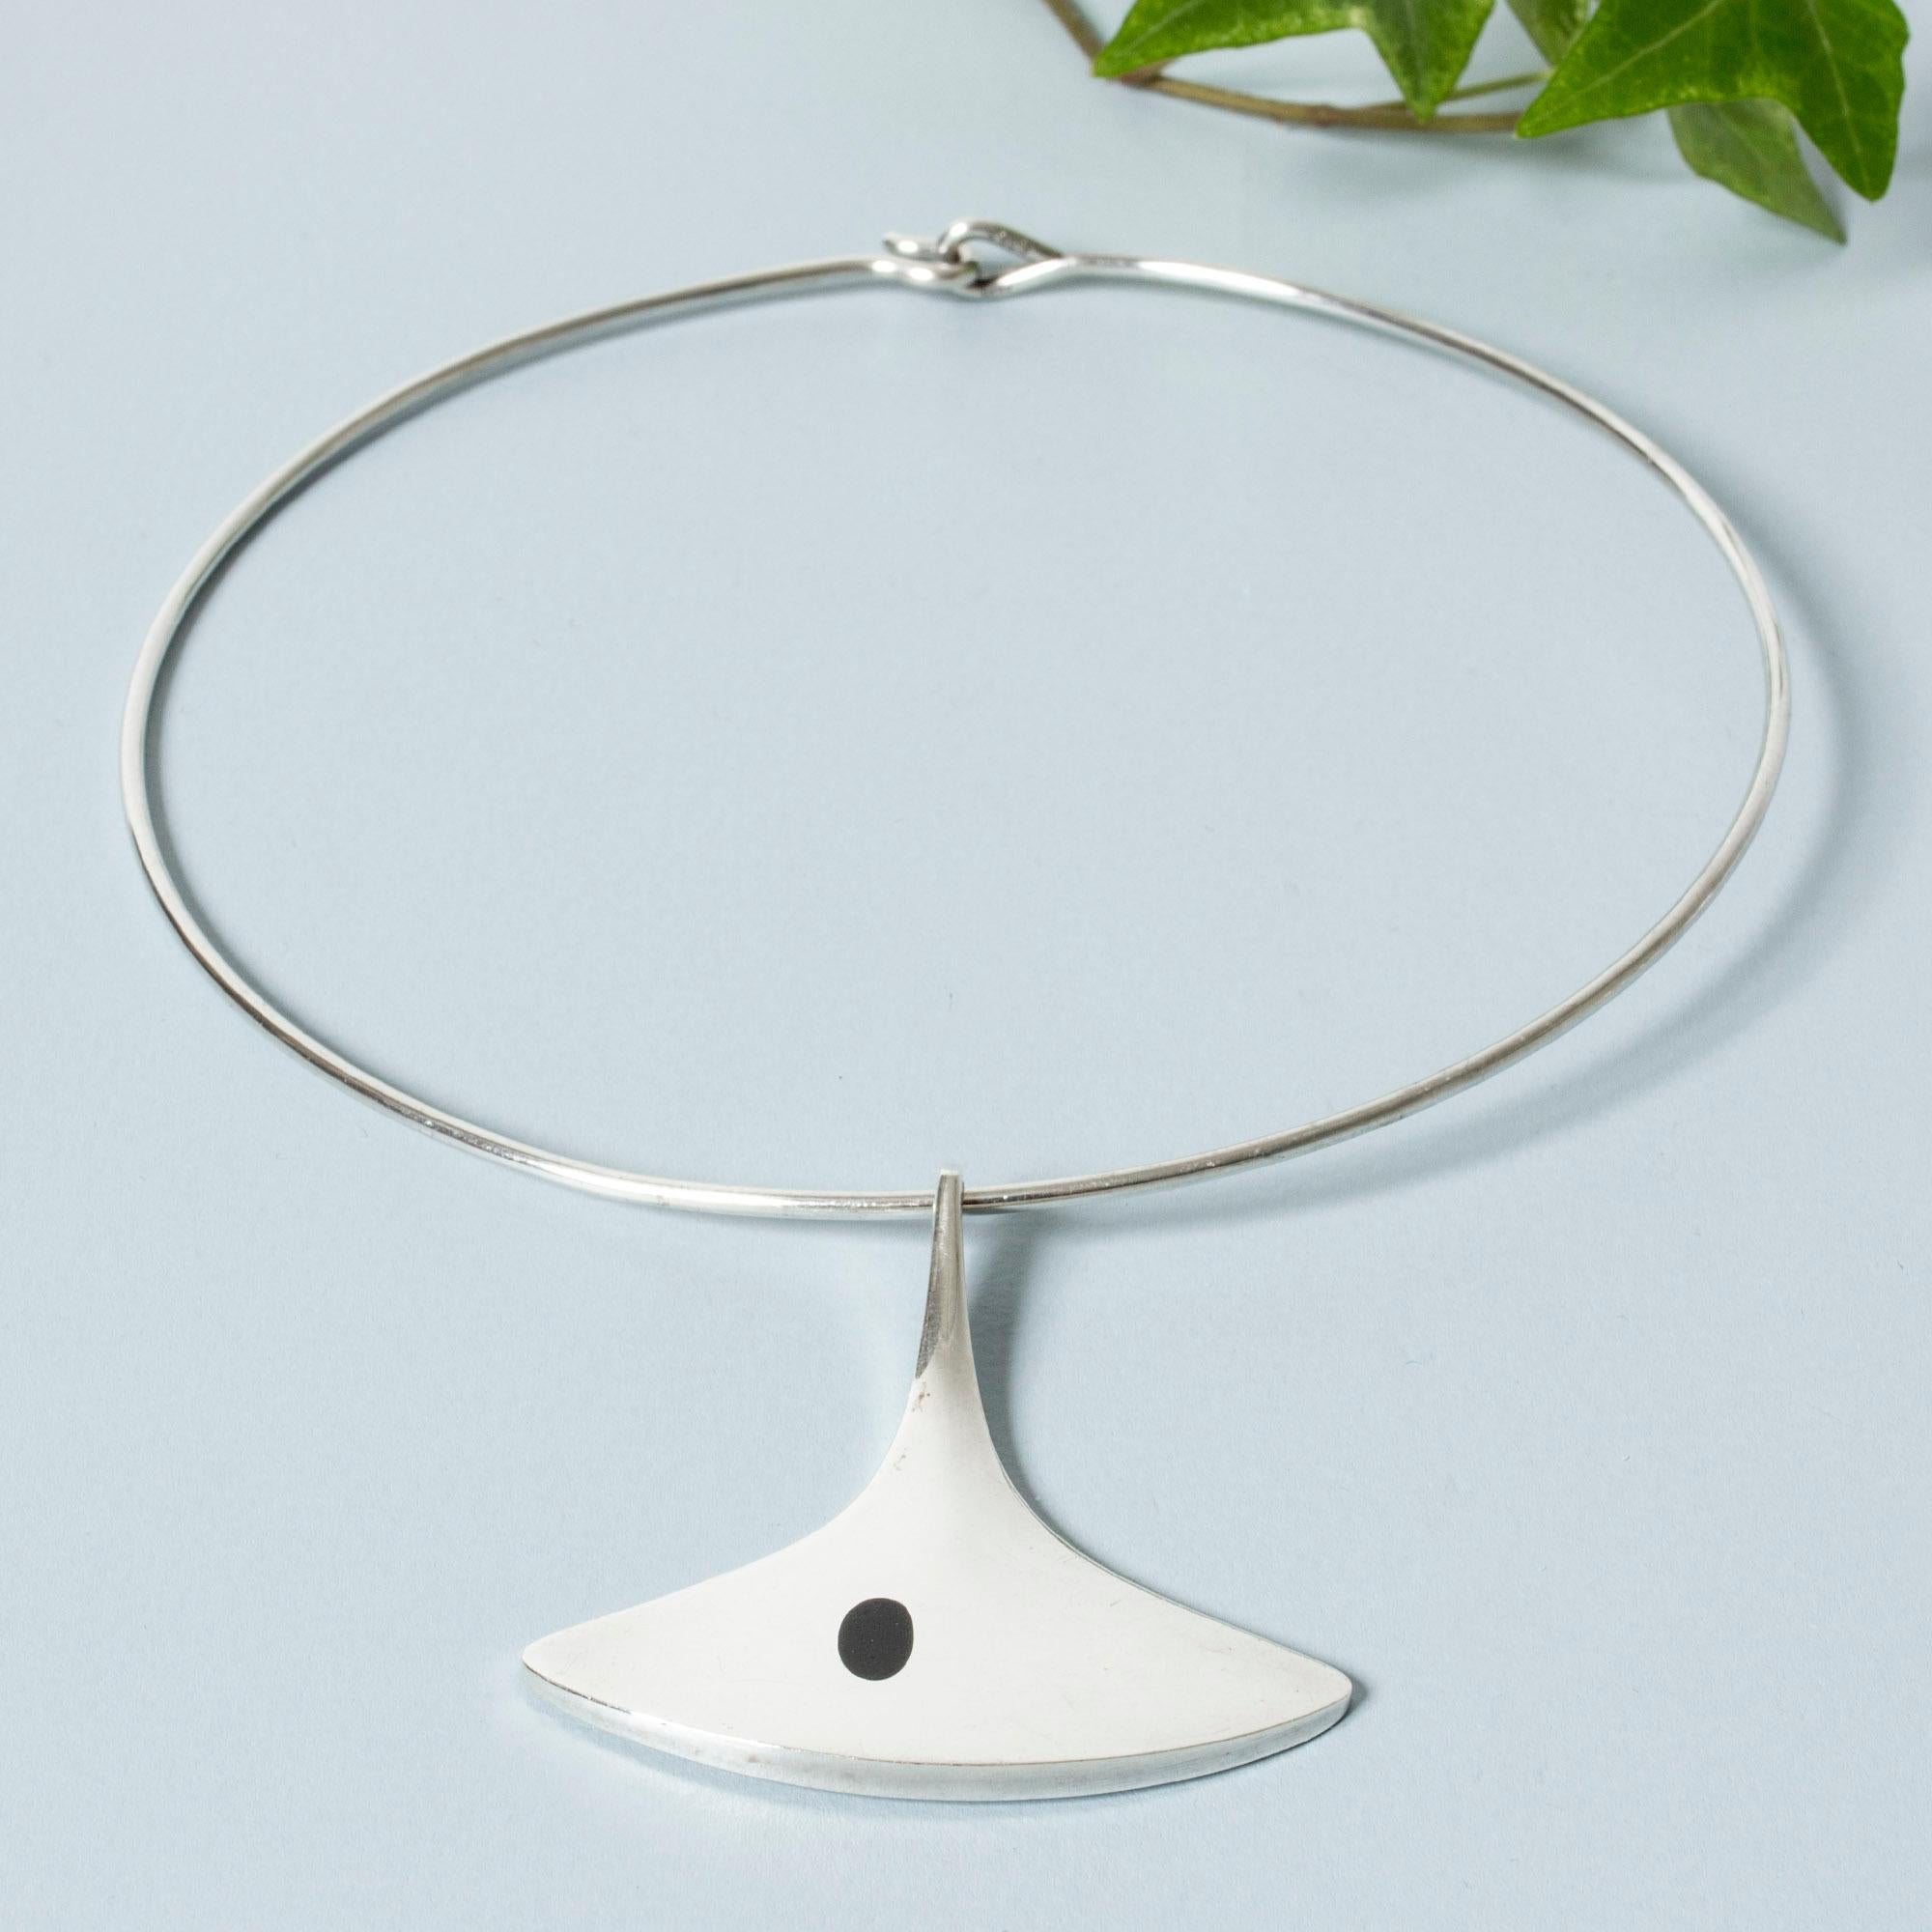 Striking silver neckring by Bent Gabrielsen Pedersen, with a pendant in a smooth, organic form. Onyx stone fleck. Appealing, streamlined look with a solid weight.

Height of pendant 5 cm, width 4.9 cm.